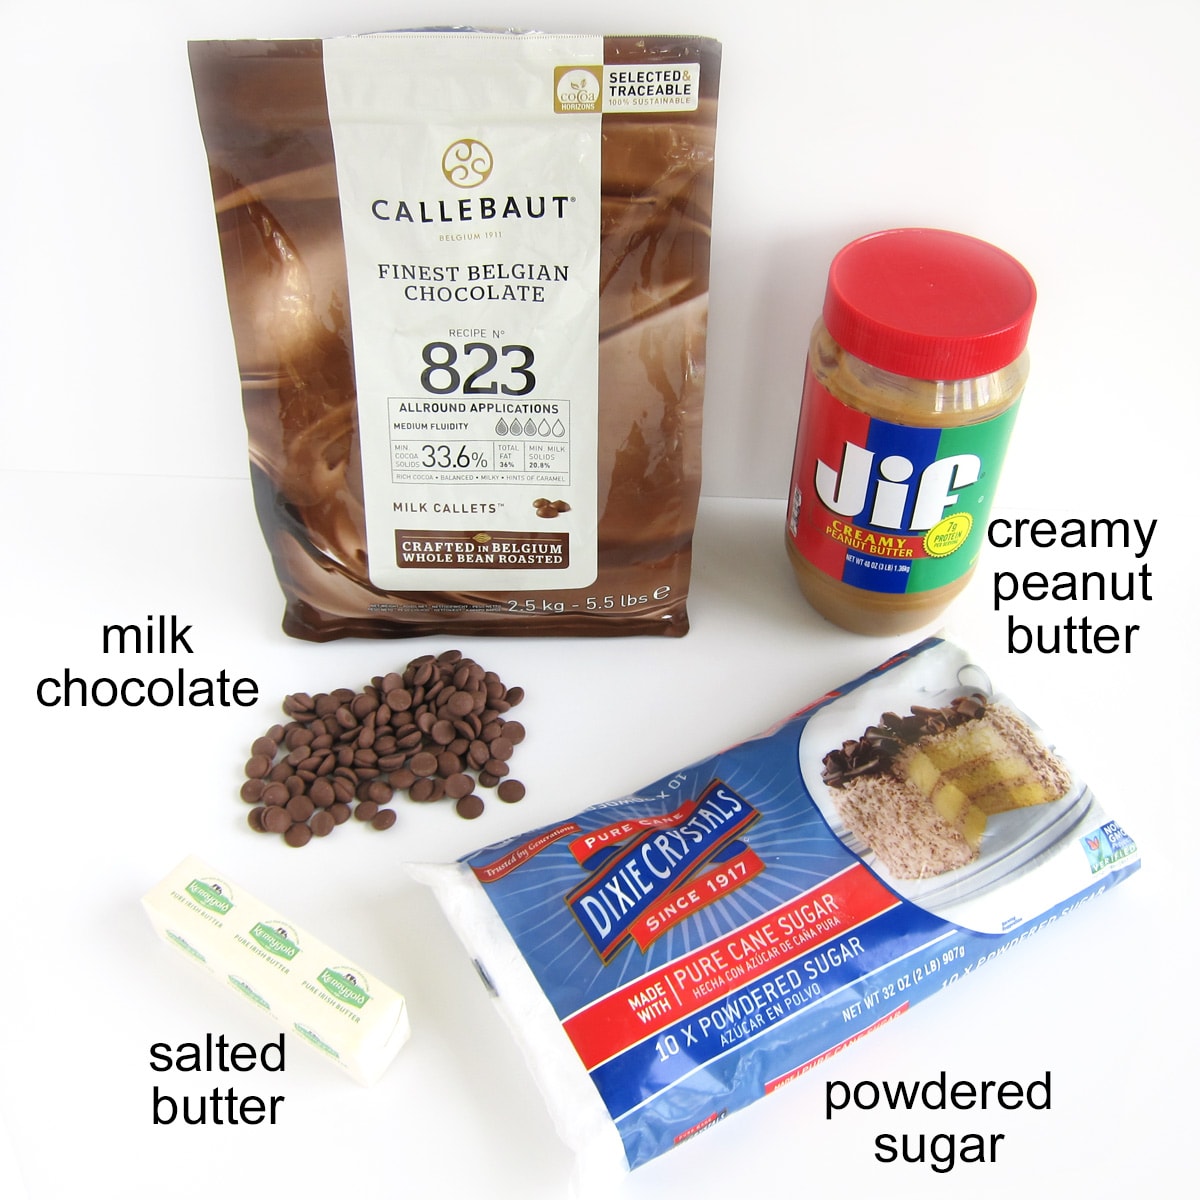 Ingredients to make Giant Reese's Cups including Callebaut Milk Chocolate, Jif Peanut Butter, Kerrygold Salted Butter, and Dixie Crystals Powdered Sugar.